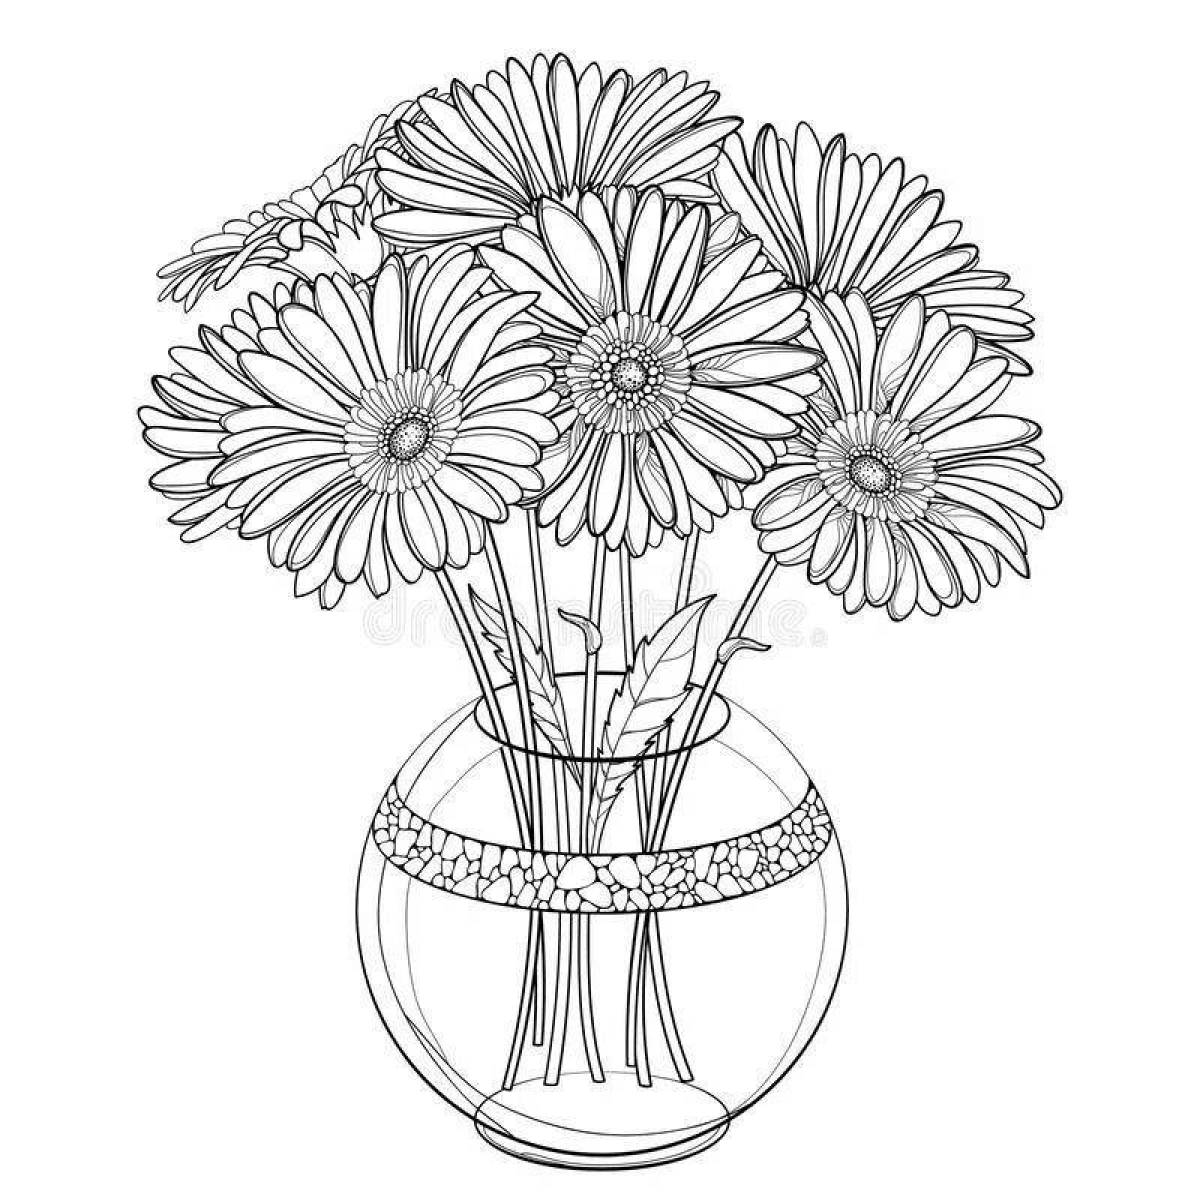 Coloring book brilliant bouquet of daisies